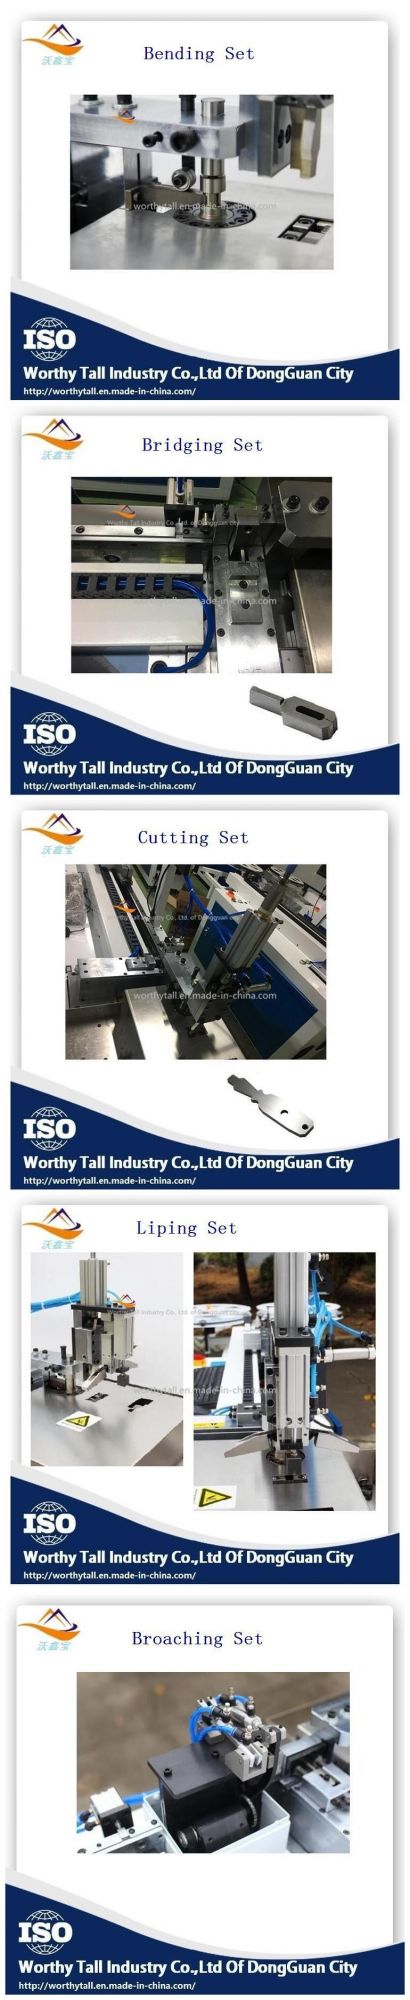 Automatic Die Cutting and Bending Machine for Packaging Industry